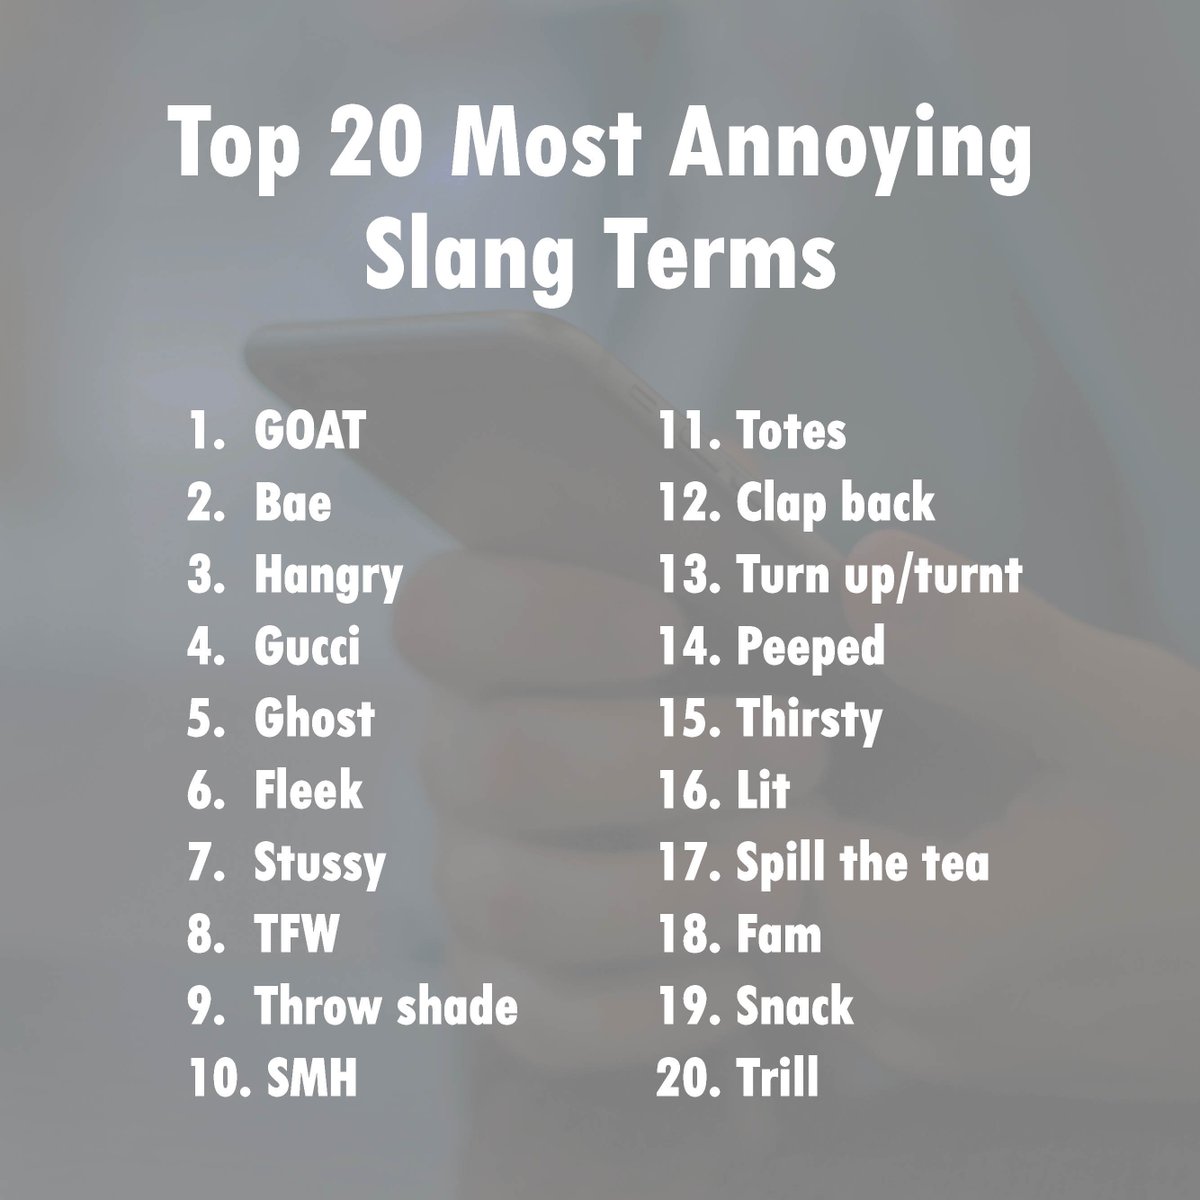 Zware vrachtwagen ondernemen pepermunt FOX 29 på Twitter: "HOW MANY DO YOU USE? According to a survey of 2,000  Americans, these are the most annoying slang words people use. 🤔  https://t.co/y85MdpZKLn" / Twitter